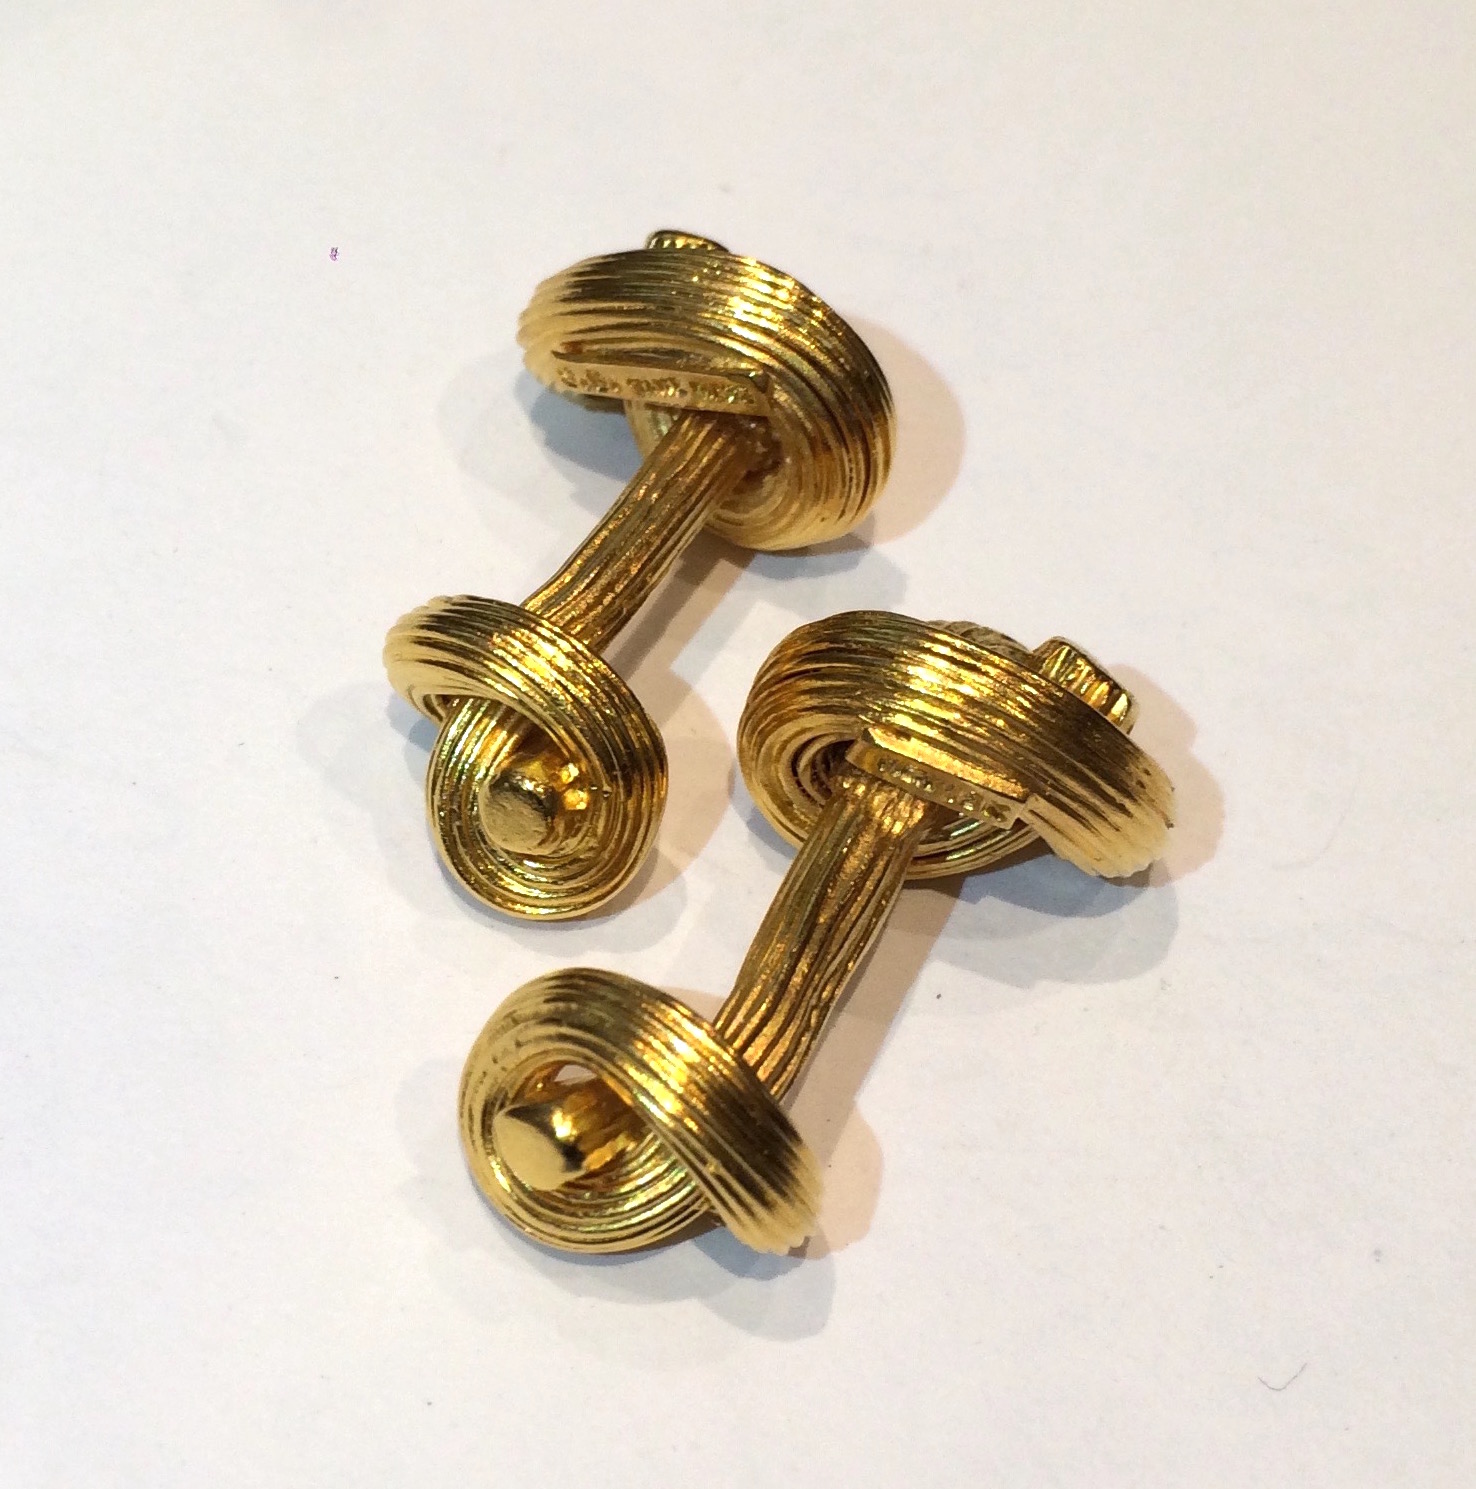 Soledad Garcia  for Tane, Mexico, solid 18k gold “Twisted Knot” cufflinks, signed, c. 2005